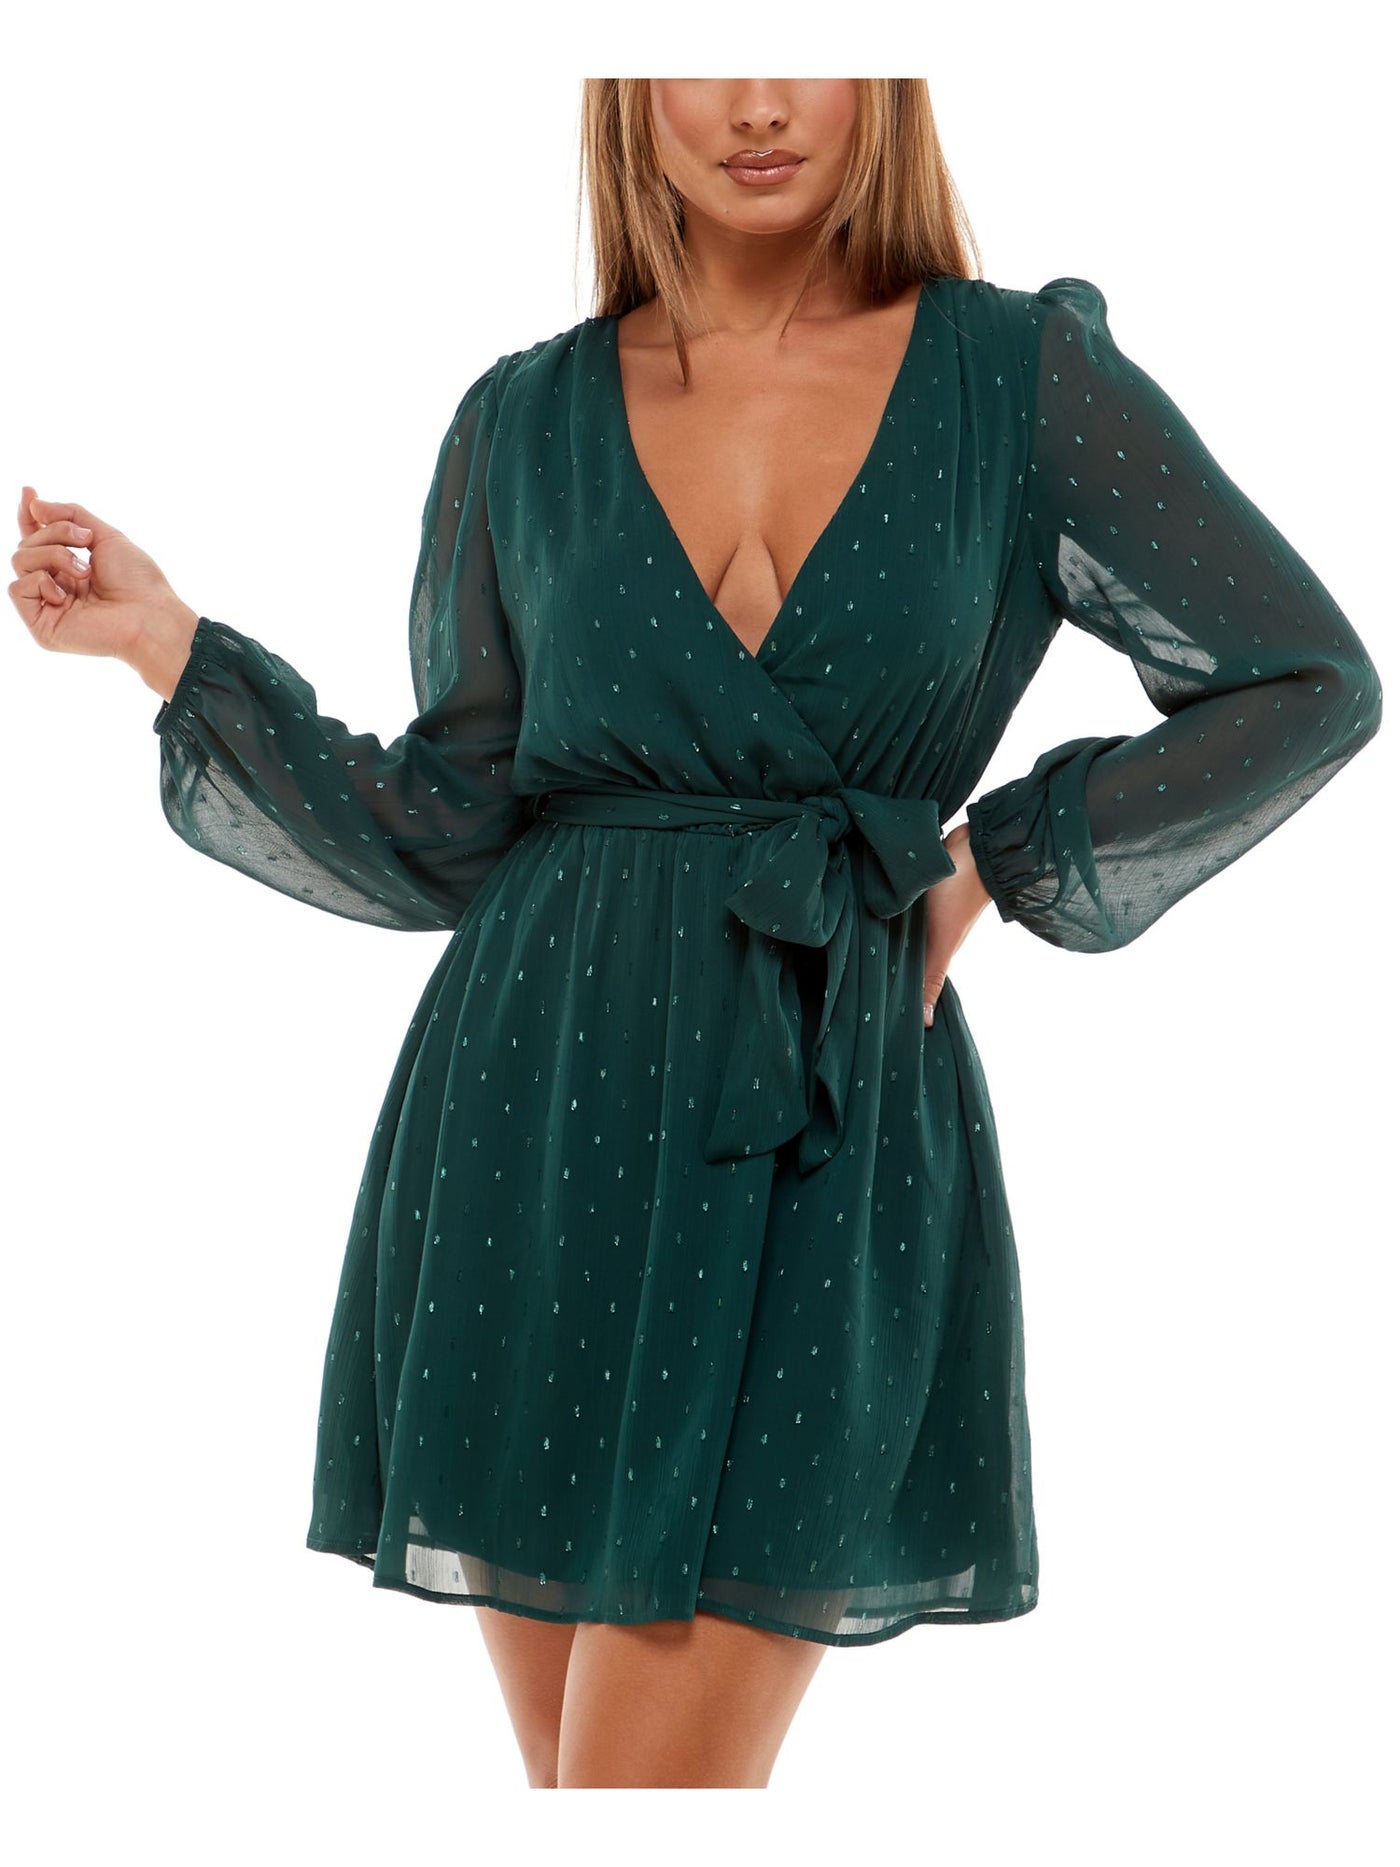 SPEECHLESS Womens Belted Zippered Long Sleeve Surplice Neckline Short Party Fit + Flare Dress